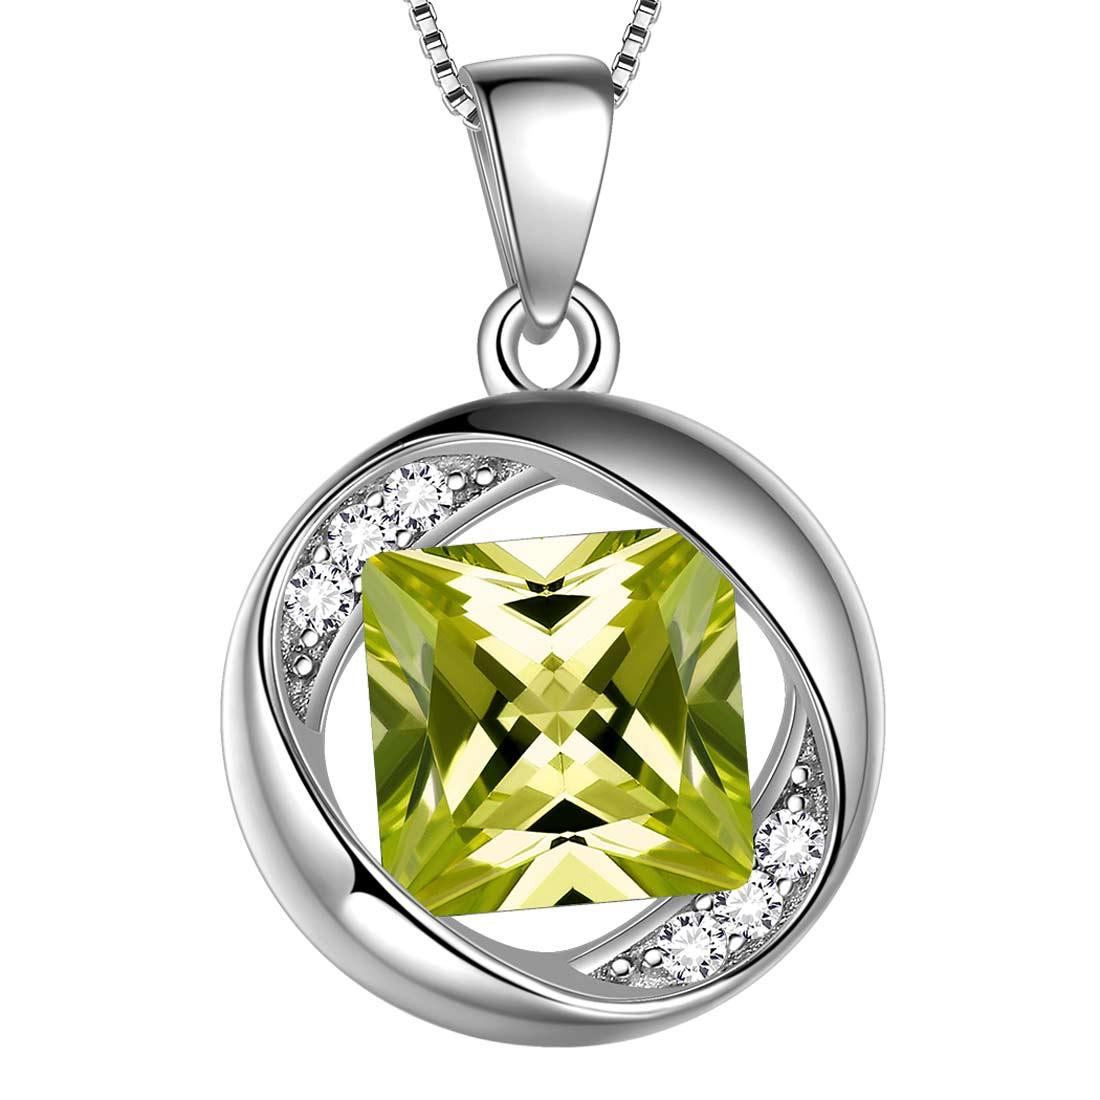 Round Birthstone August Peridot Necklace Pendant - Necklaces - Aurora Tears